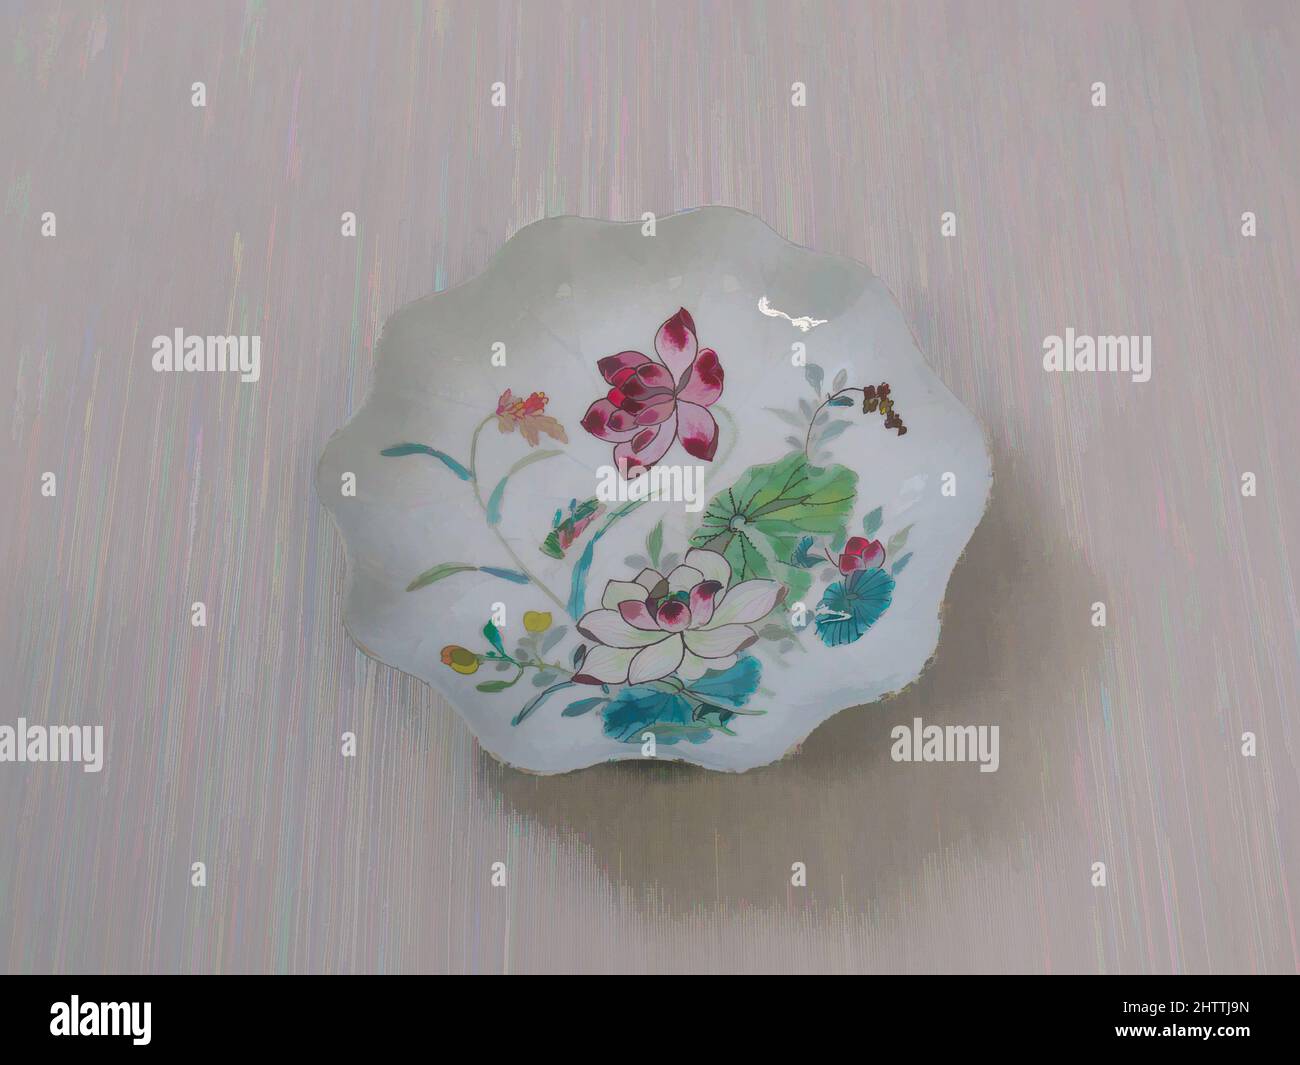 Art inspired by Dish on Three Feet, Qing dynasty (1644–1911), first half of the 19th century, China, Porcelain painted in overglaze polychrome enamels, Diam. 5 in. (12.7 cm), Ceramics, Classic works modernized by Artotop with a splash of modernity. Shapes, color and value, eye-catching visual impact on art. Emotions through freedom of artworks in a contemporary way. A timeless message pursuing a wildly creative new direction. Artists turning to the digital medium and creating the Artotop NFT Stock Photo